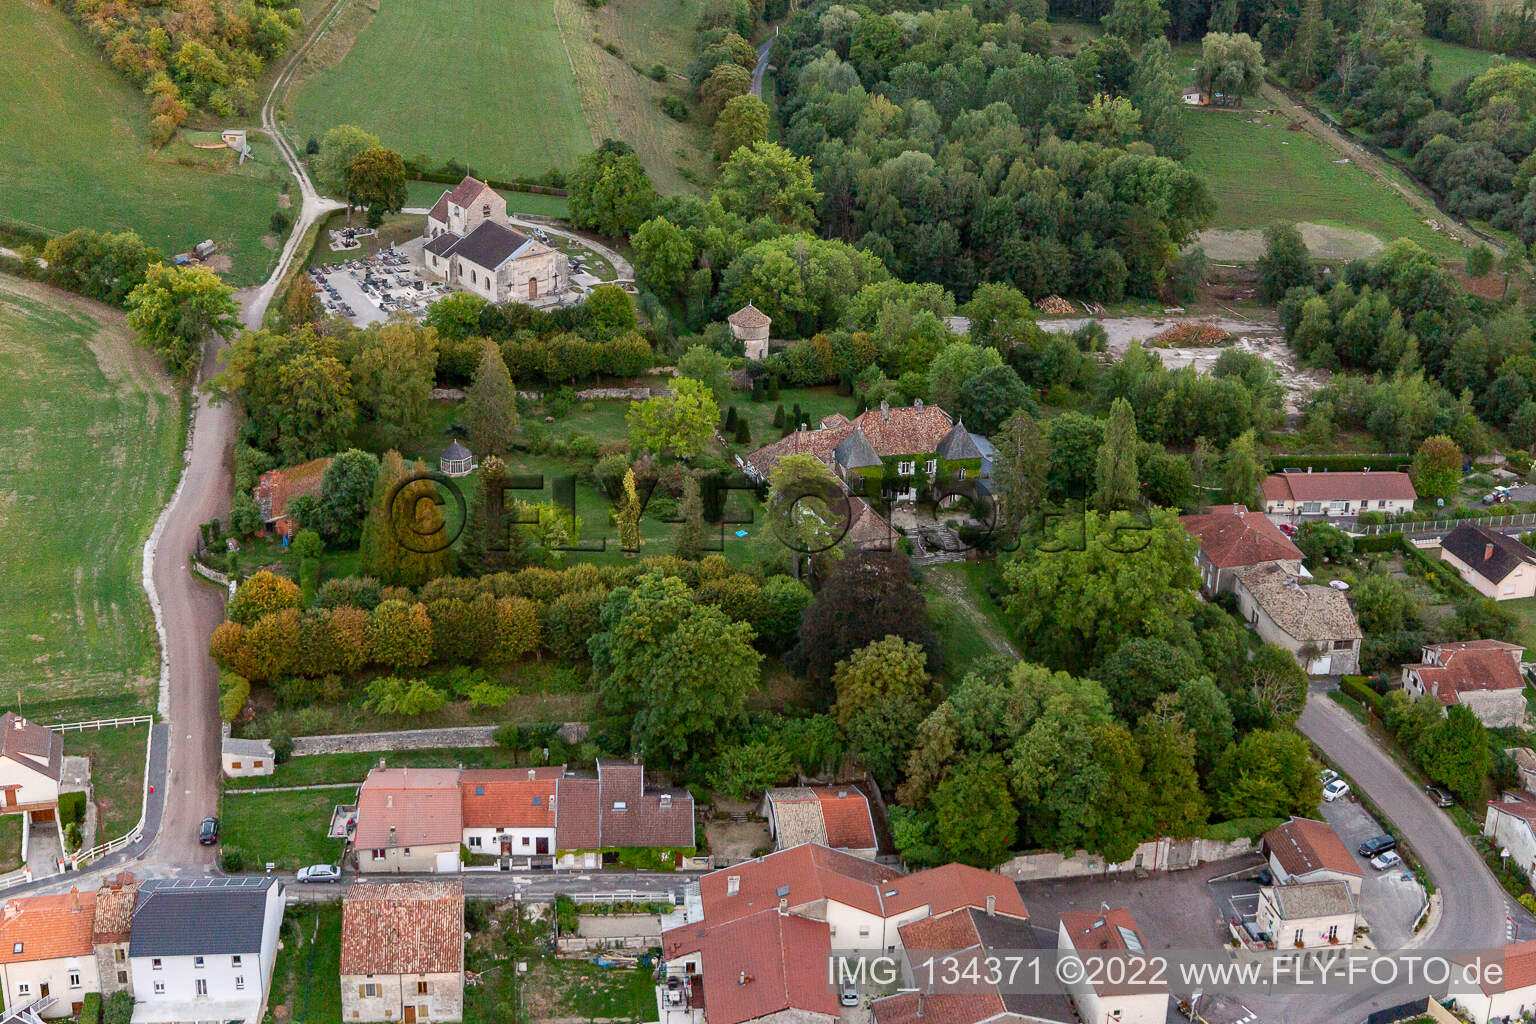 Noncourt-sur-le-Rongeant in the state Haute Marne, France seen from above